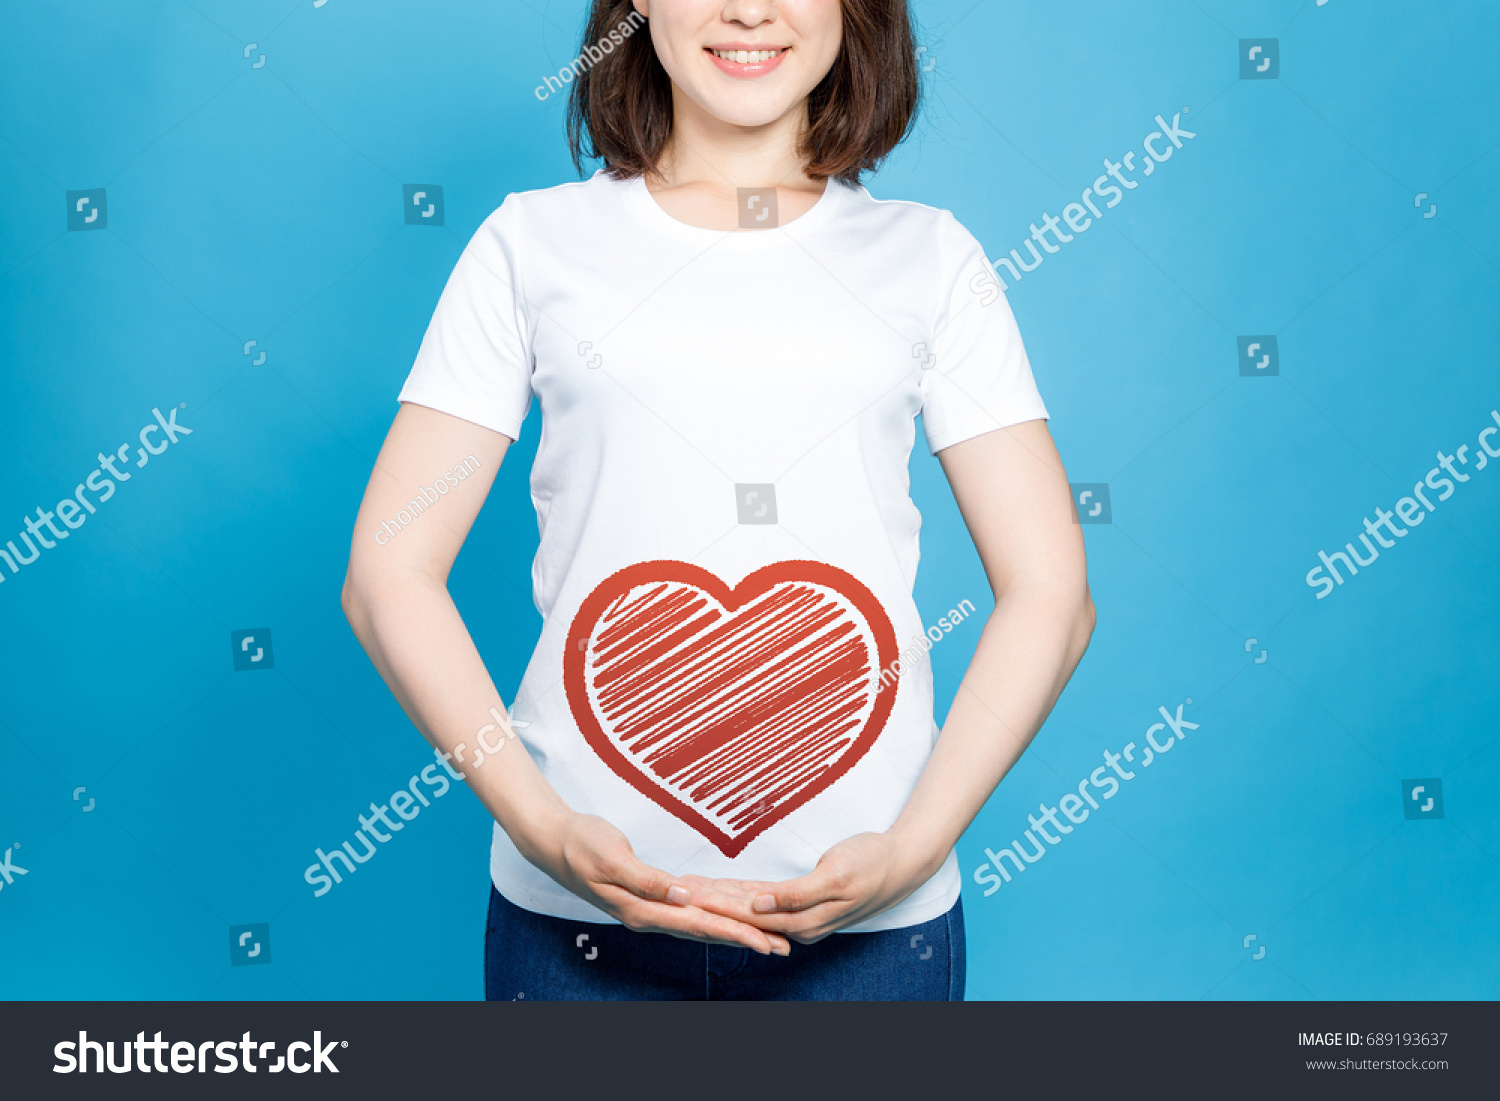 young woman holding a heart symbol. #689193637